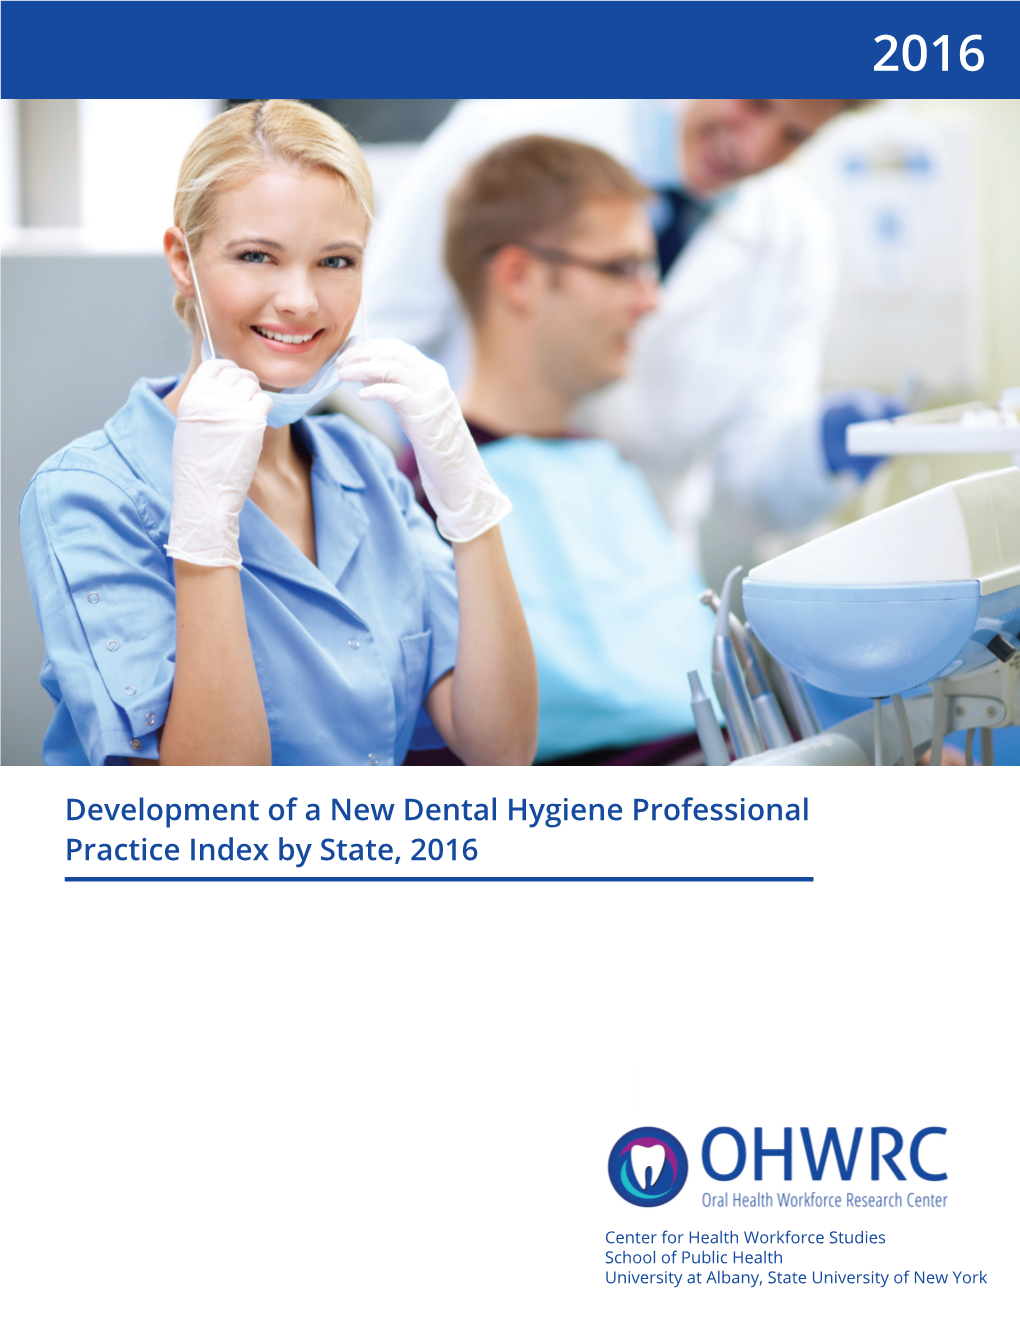 Development of a New Dental Hygiene Professional Practice Index by State, 2016